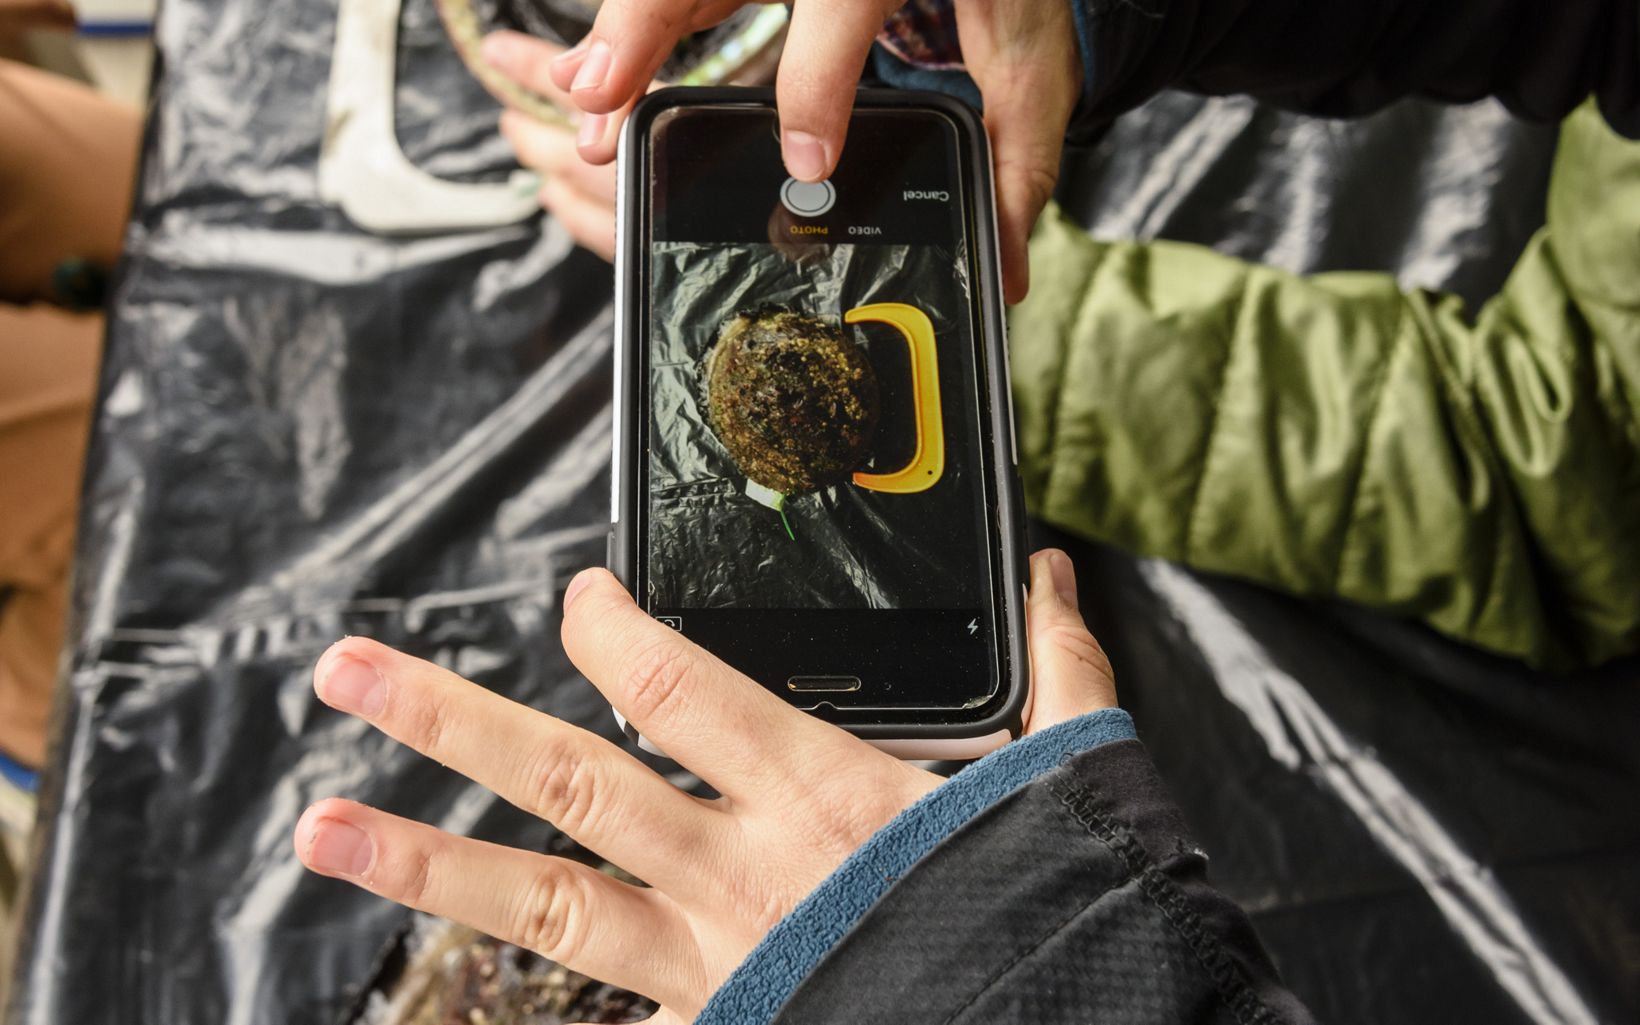 Hands holding a smartphone to photograph something brown and fuzzy that is showing through a hole in a black garbage bag.